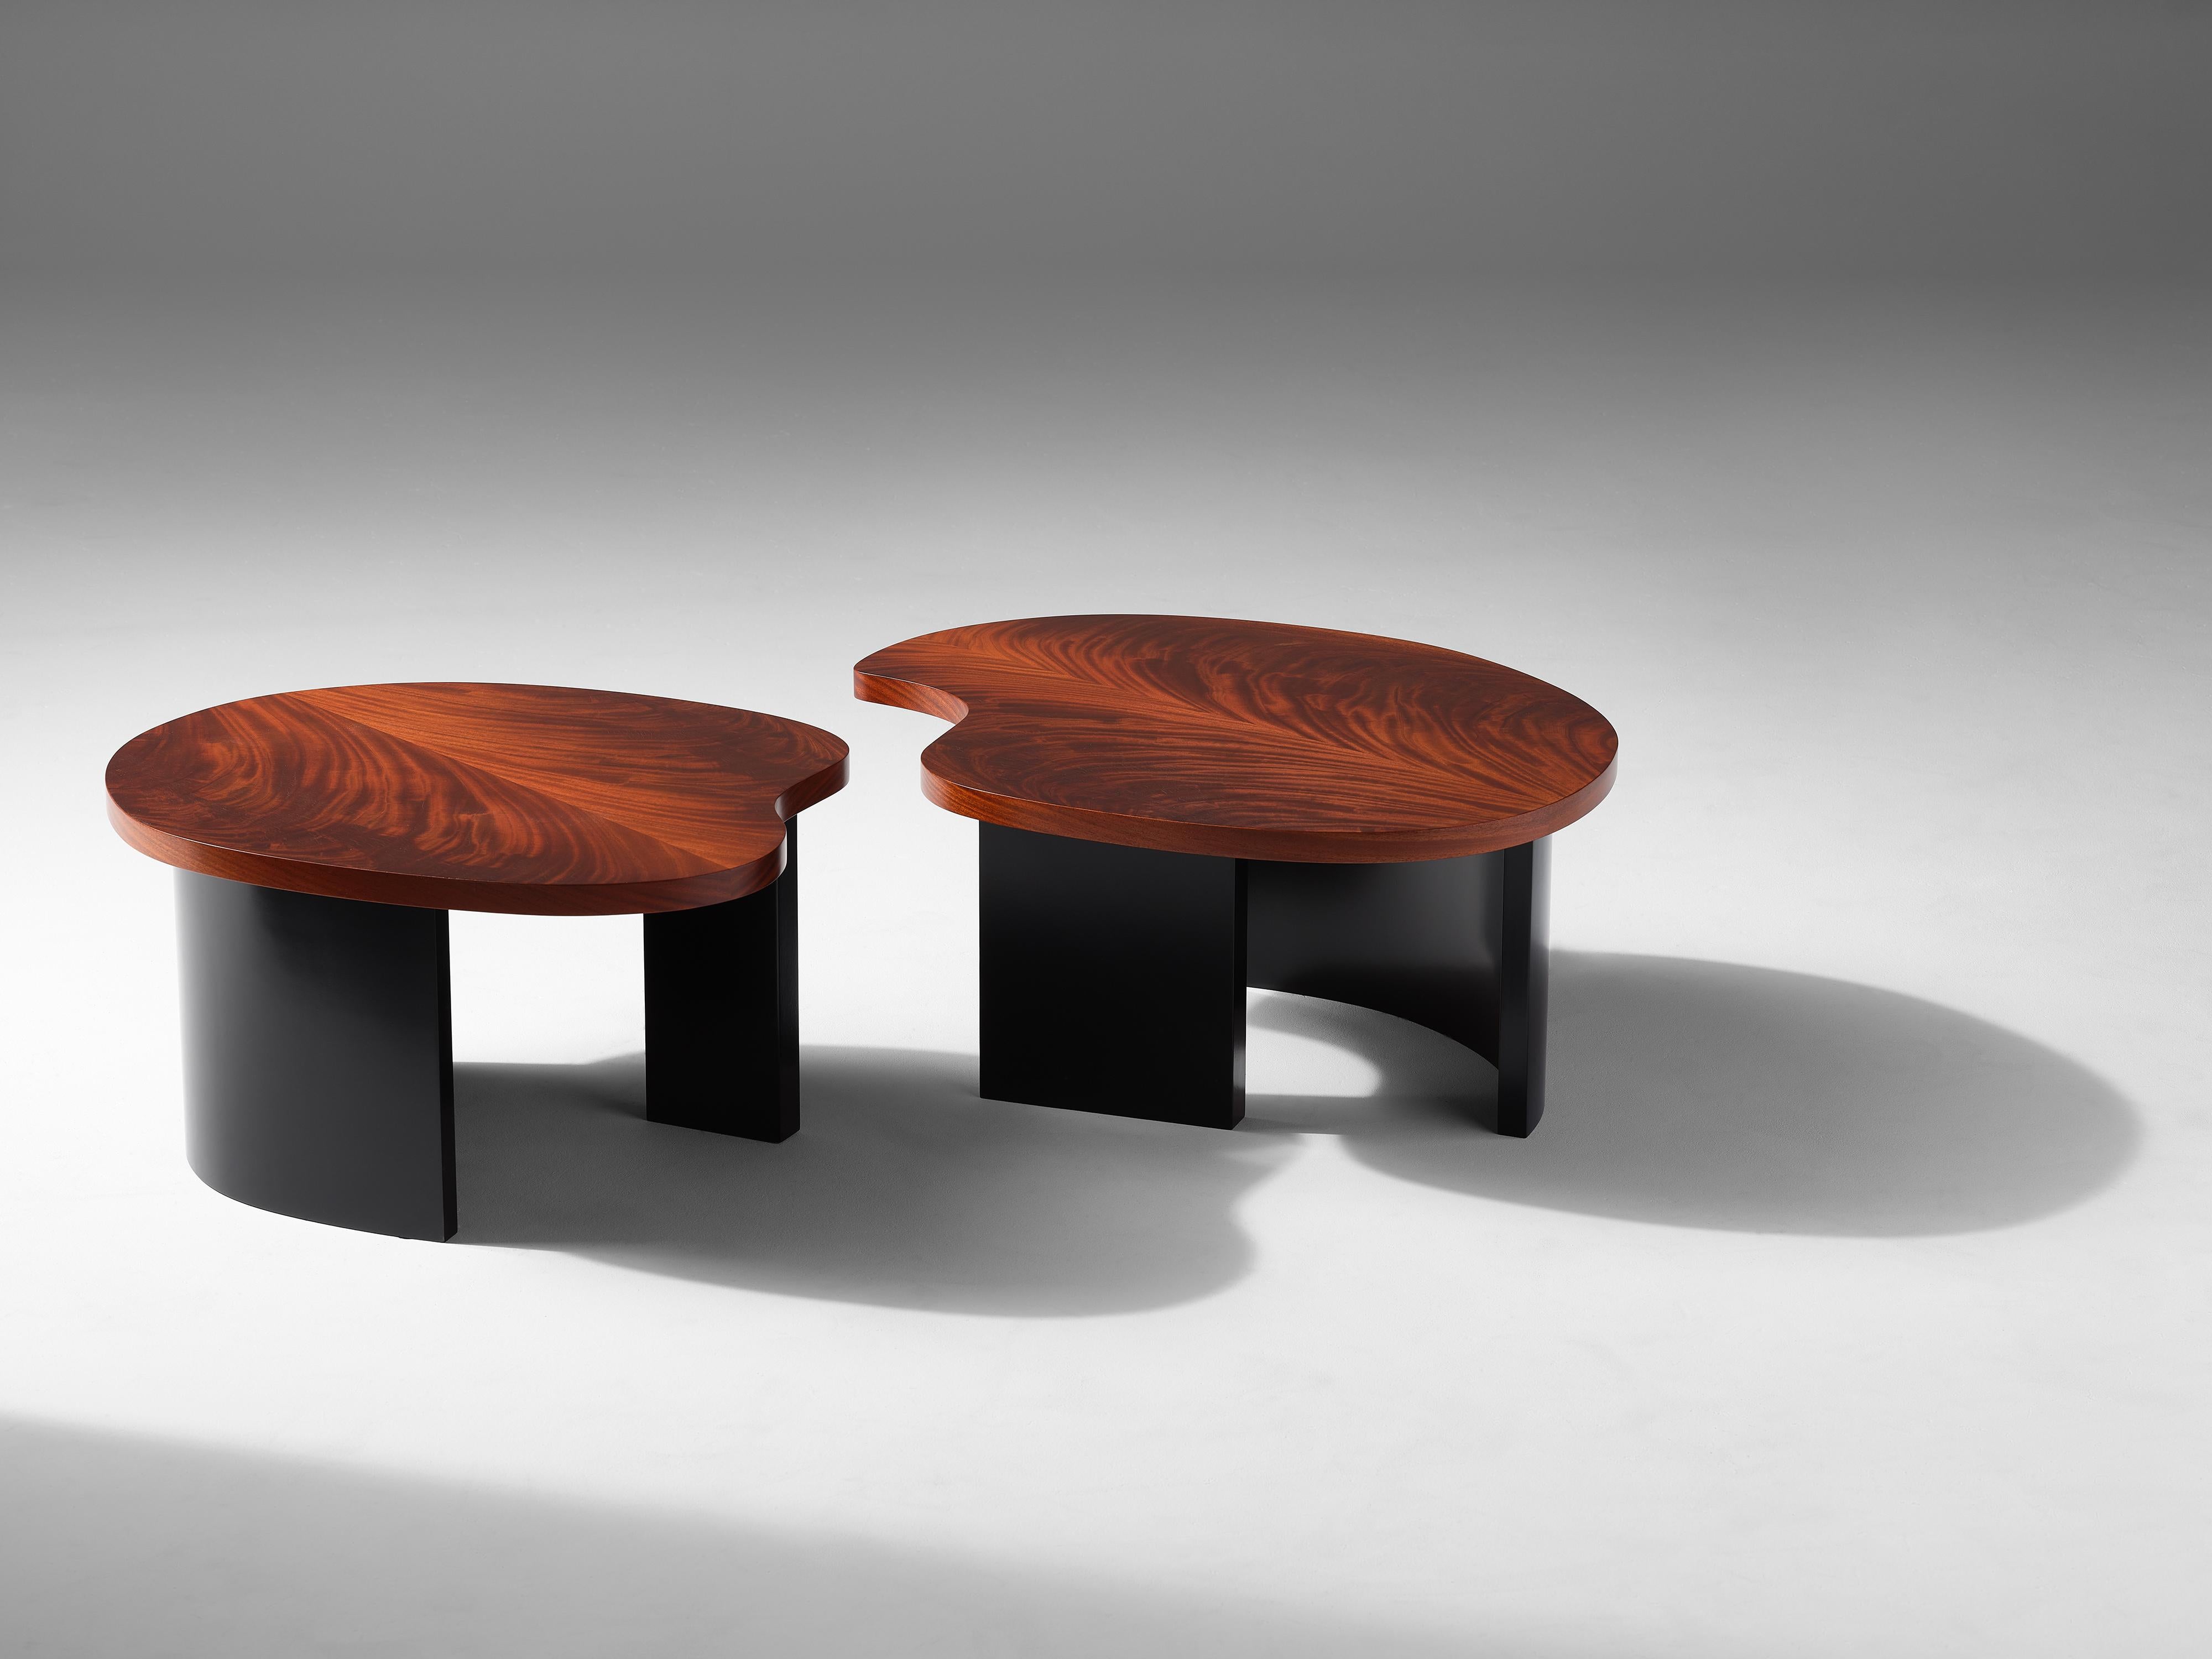 Douglas Fanning's unique bean table has an amorphous, polished mahogany top and rests upon curved, blackened steel legs. This beautifully abstract creation functions with an elegant simplicity befitting its form, pulling apart into two modular